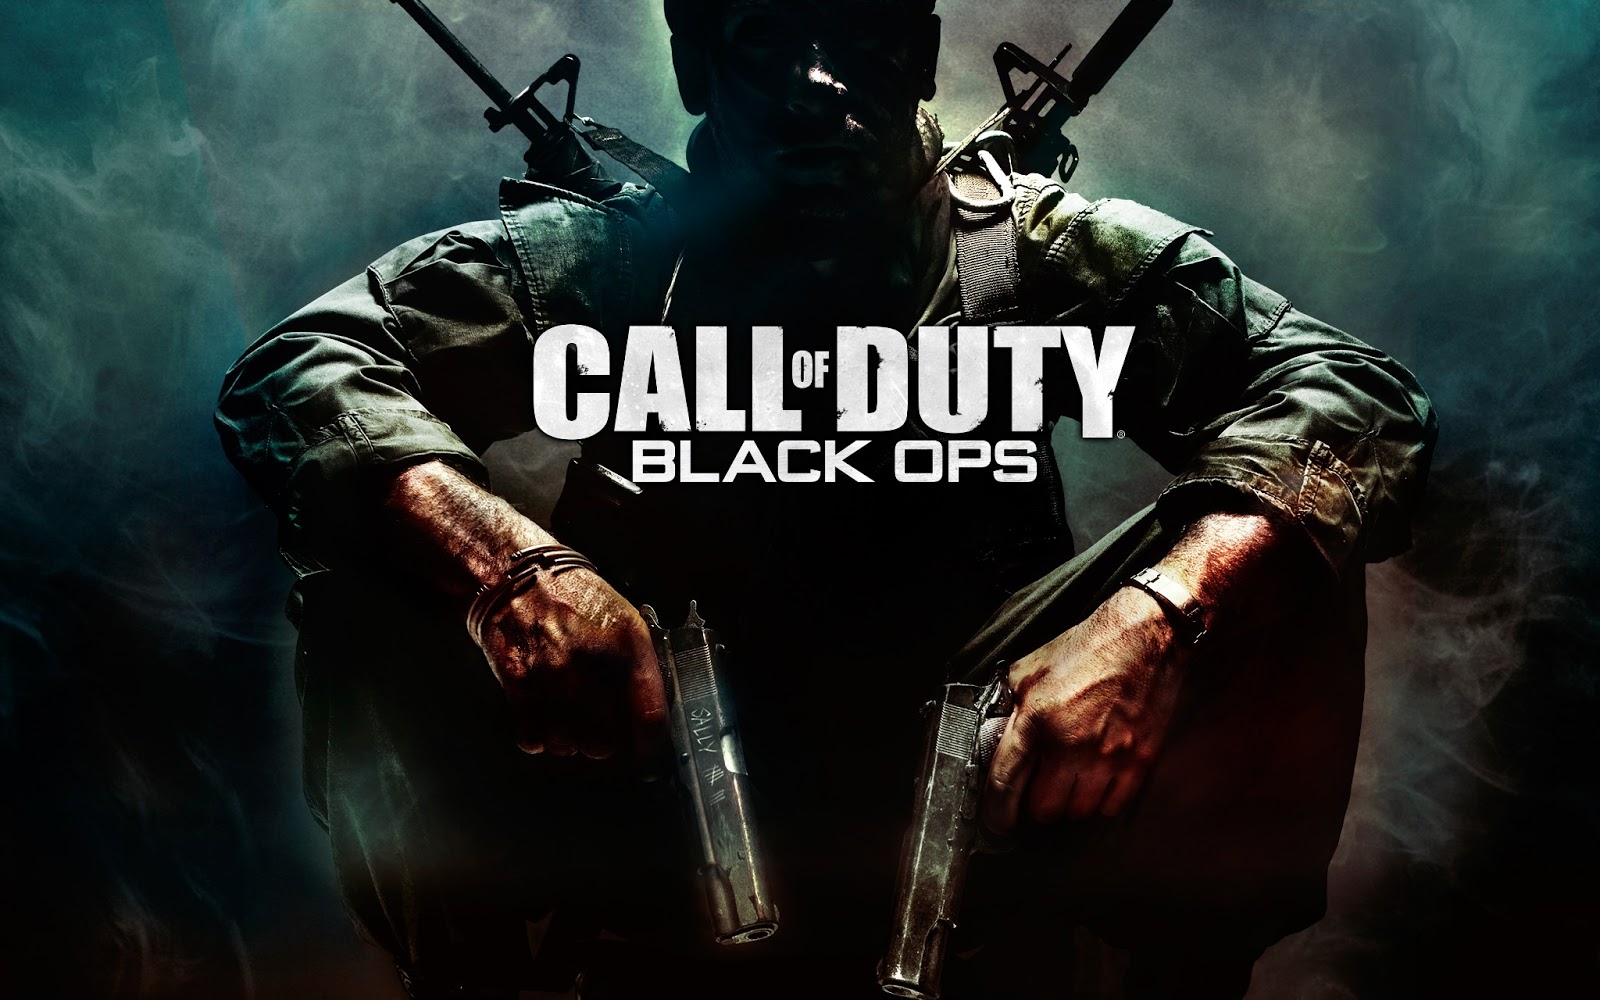  CALL  OF DUTY  HD WALLPAPERS  1920x1080 Hd Wallpapery